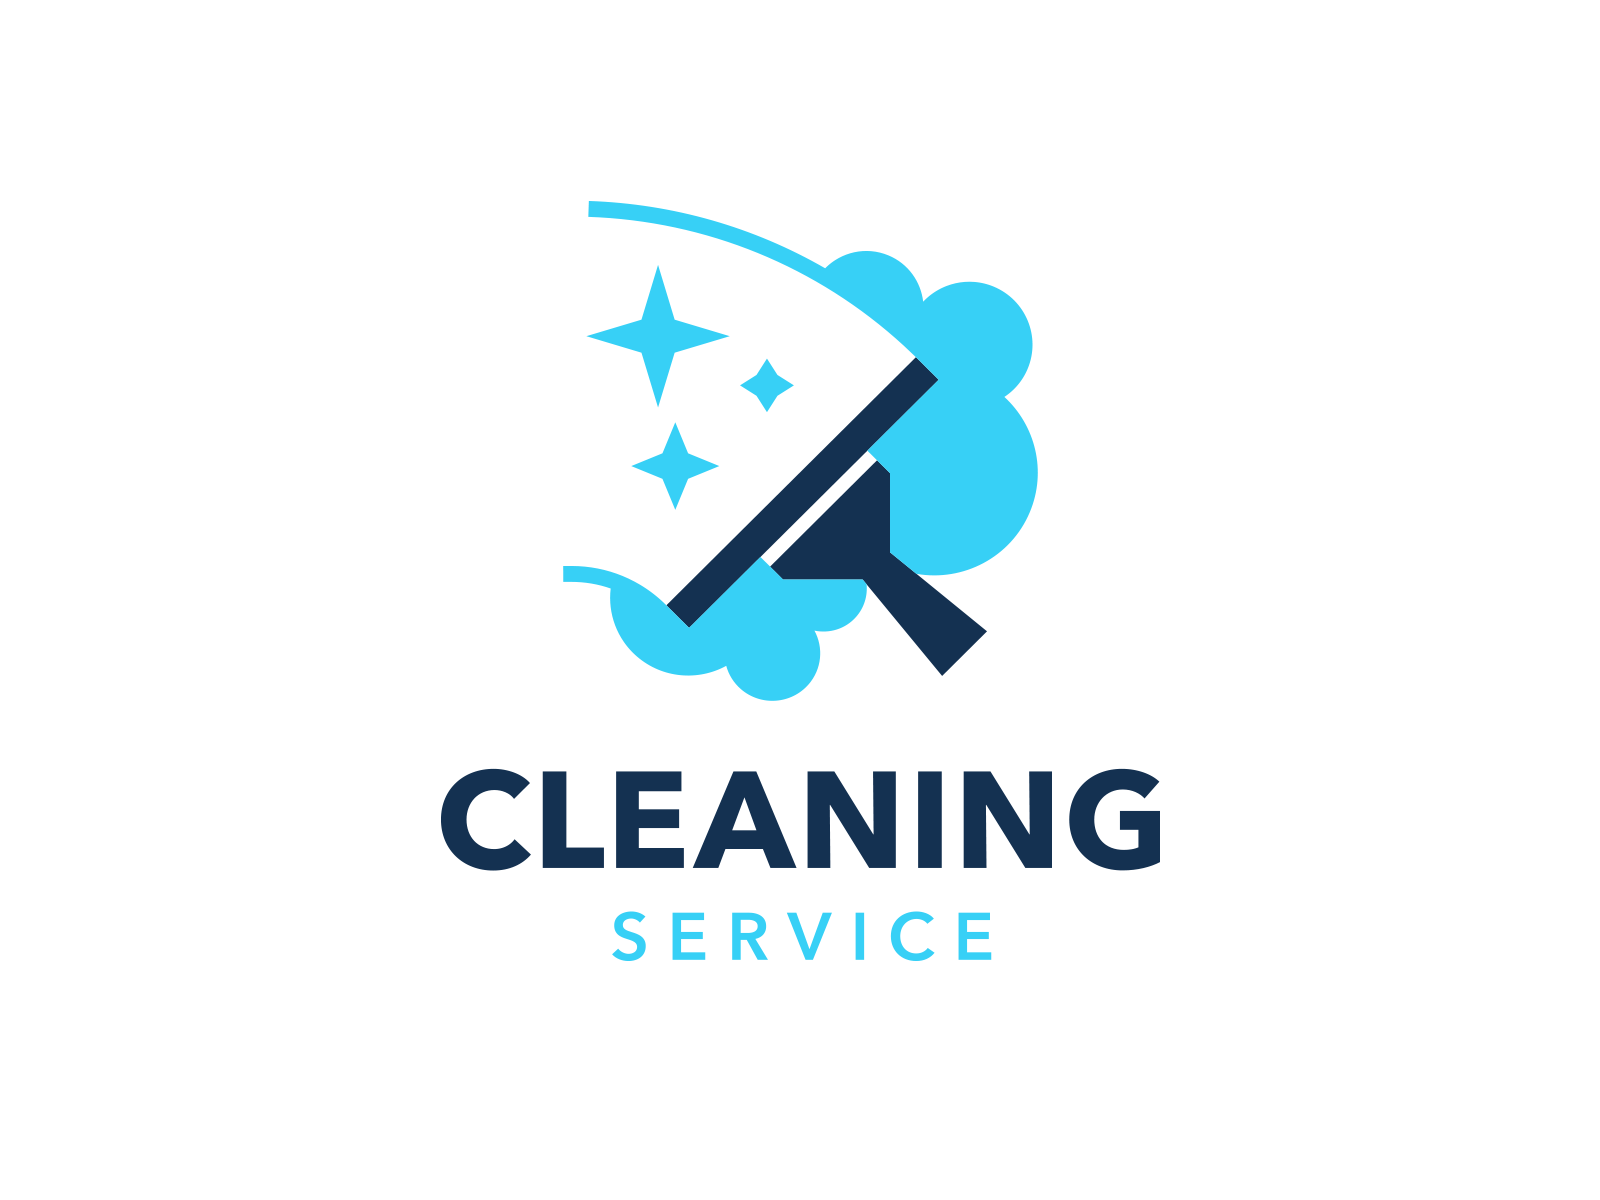 Cleaning Service logo template by Tomas Knopp on Dribbble